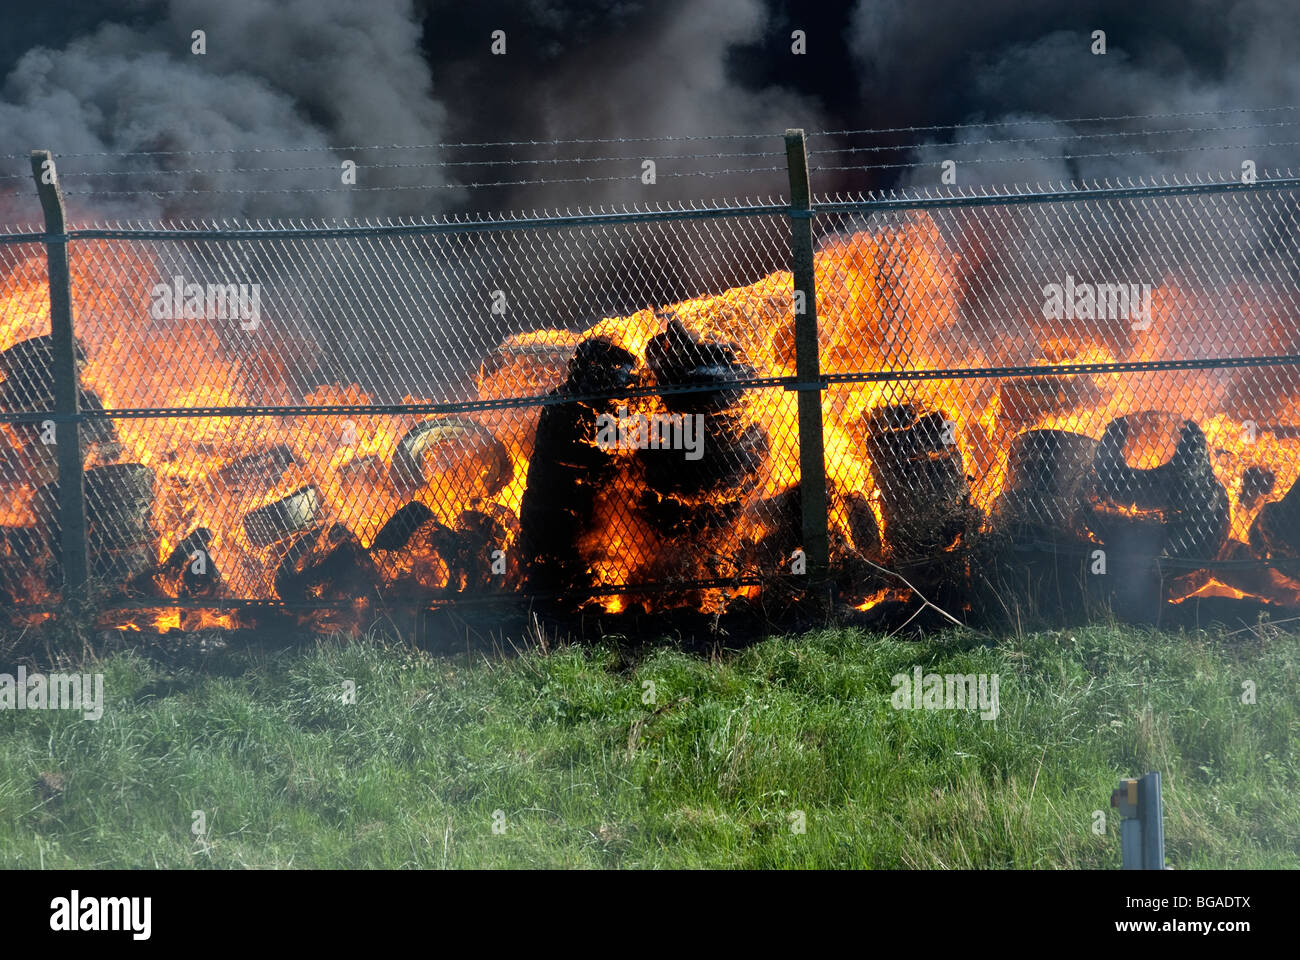 Large plumes of black smoke from large Tyre / Tire fire Stock Photo